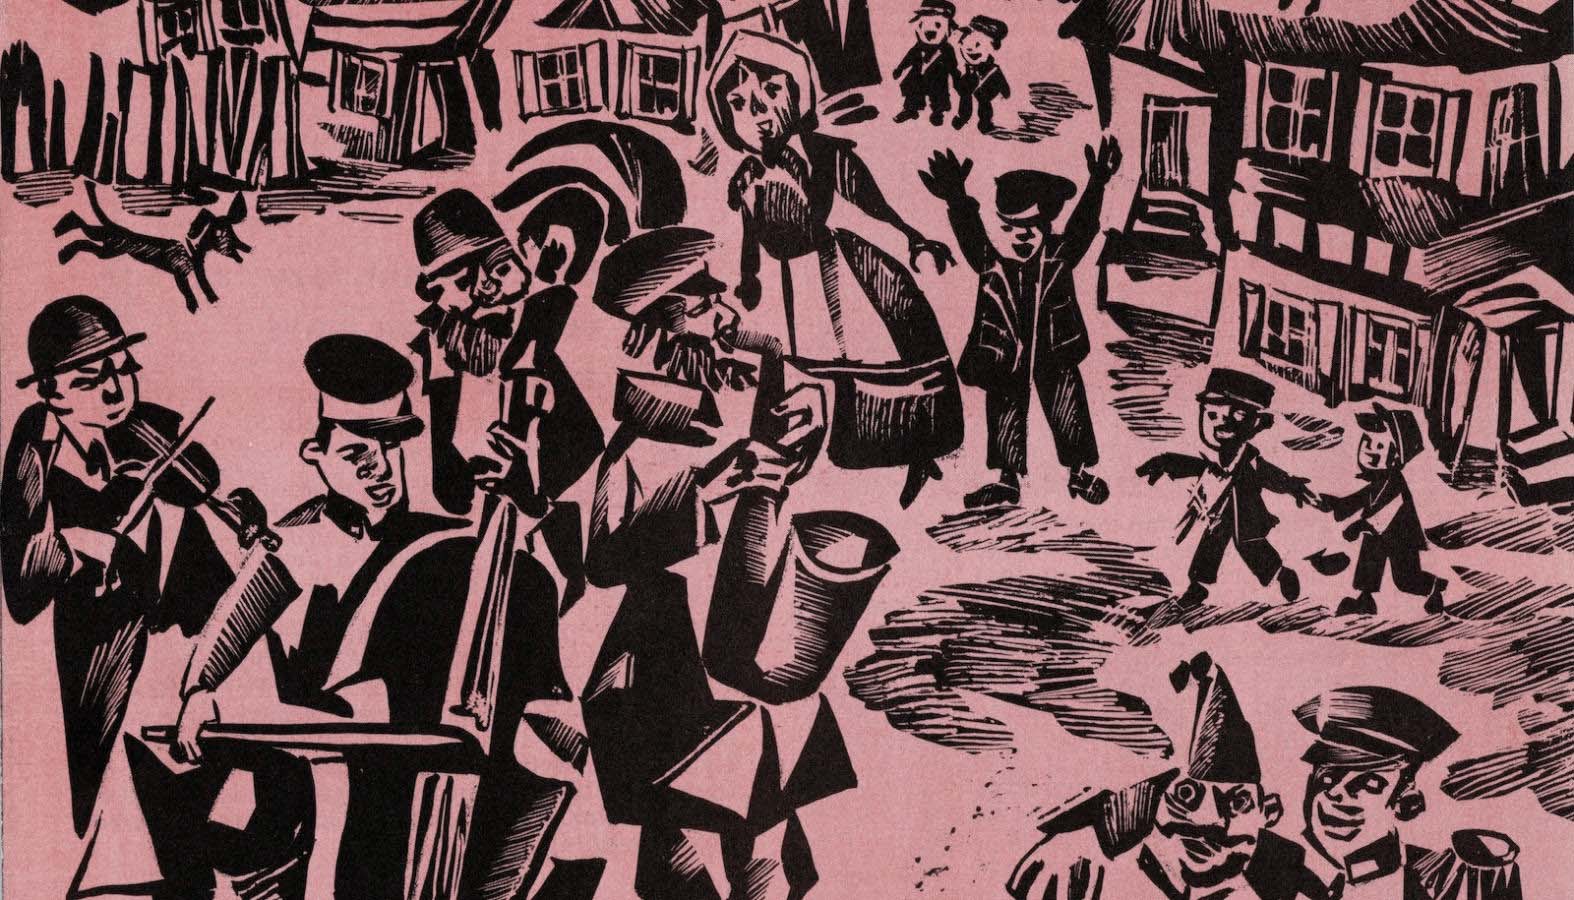 Wood block print on pink paper shows a bustling shtetl scene with musicians and children in the streets